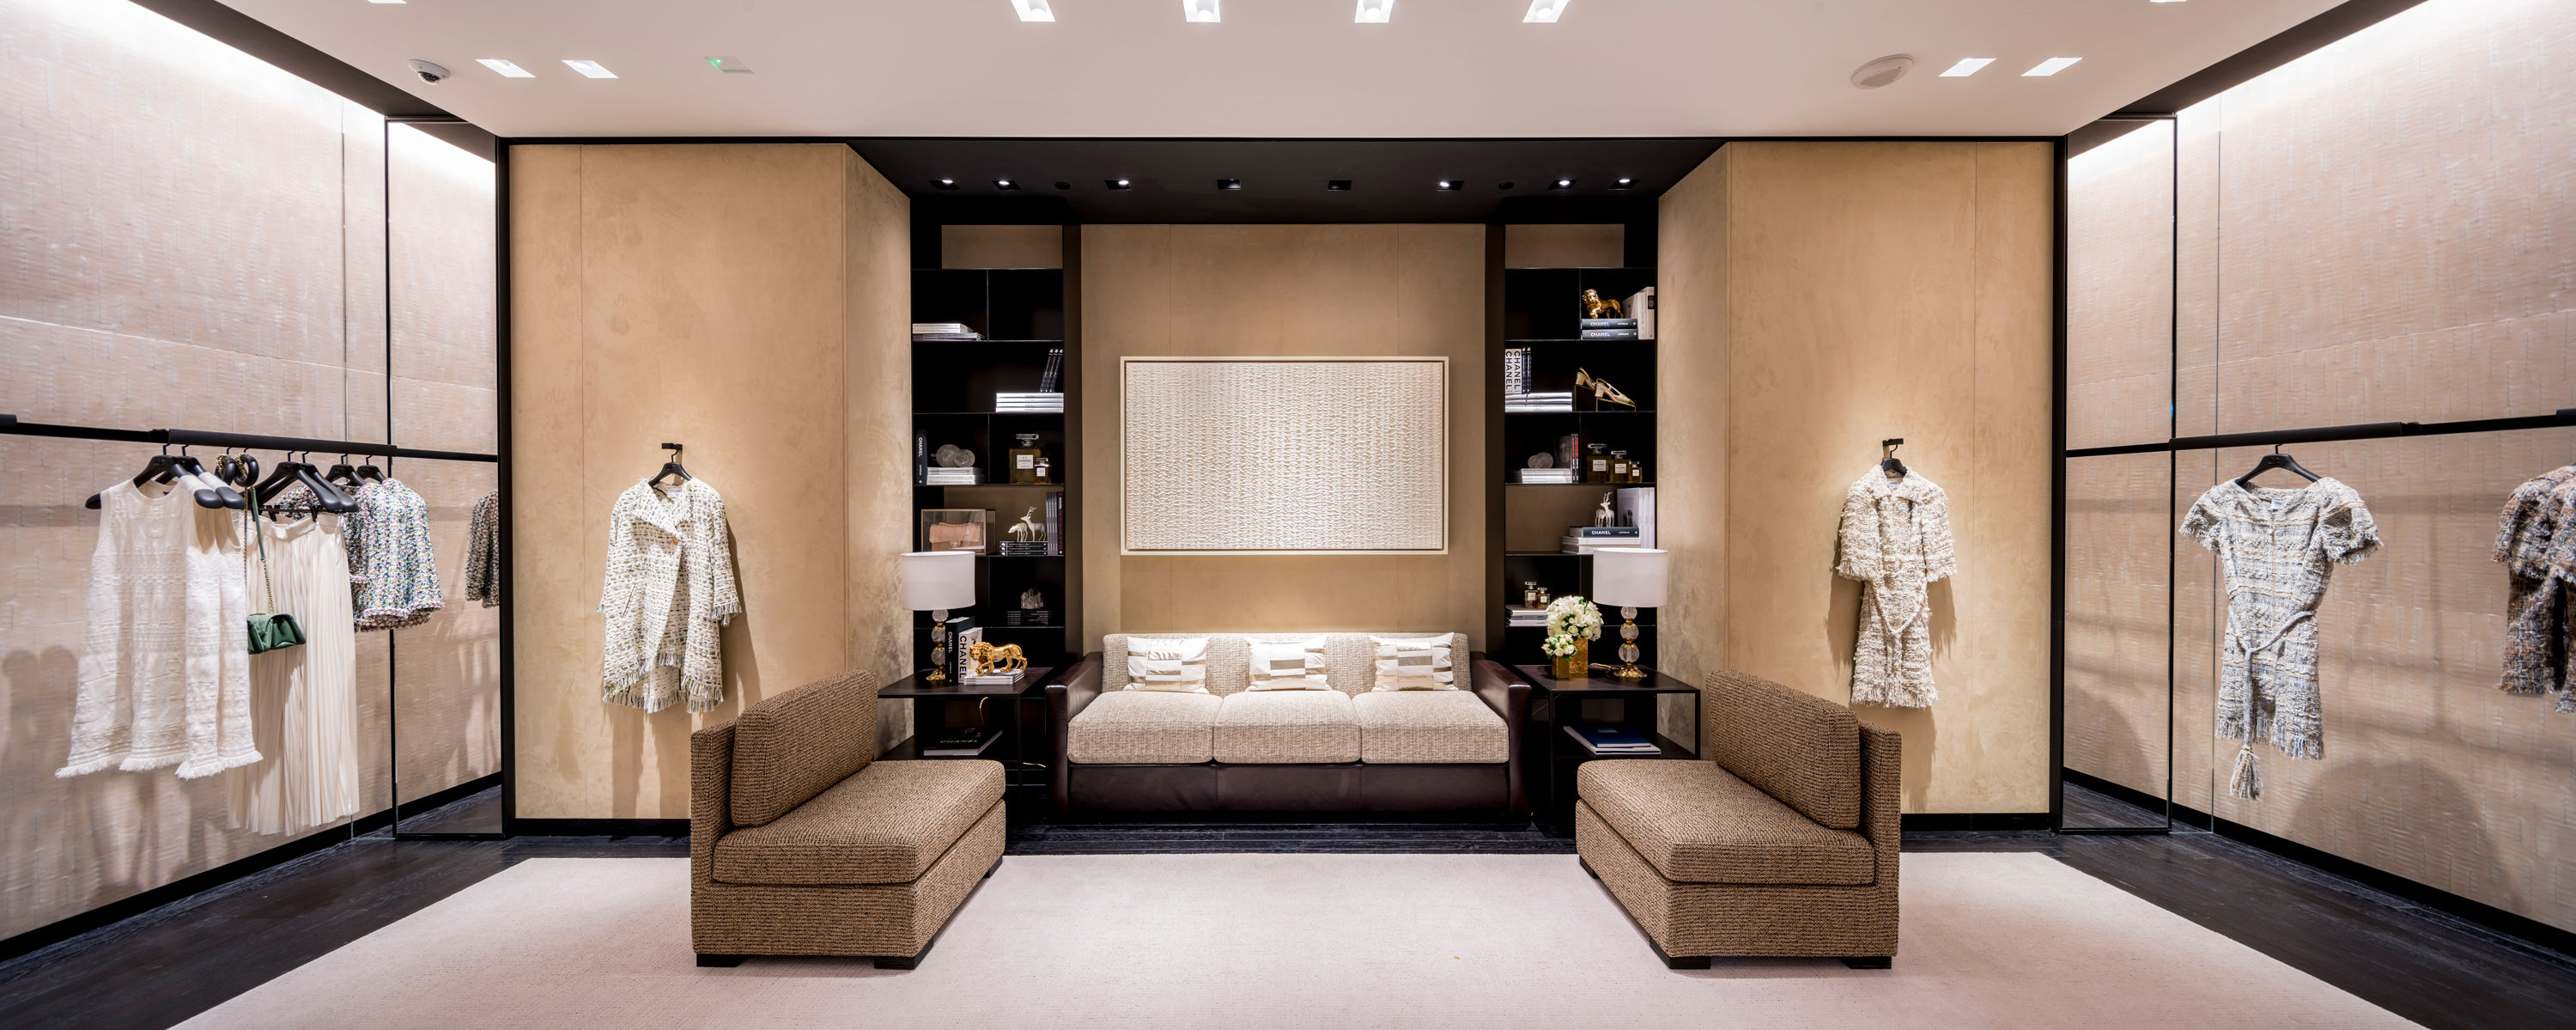 Store explore: Chanel’s new Marina Bay Sands boutique is inspired by Coco Chanel’s apartment in Paris